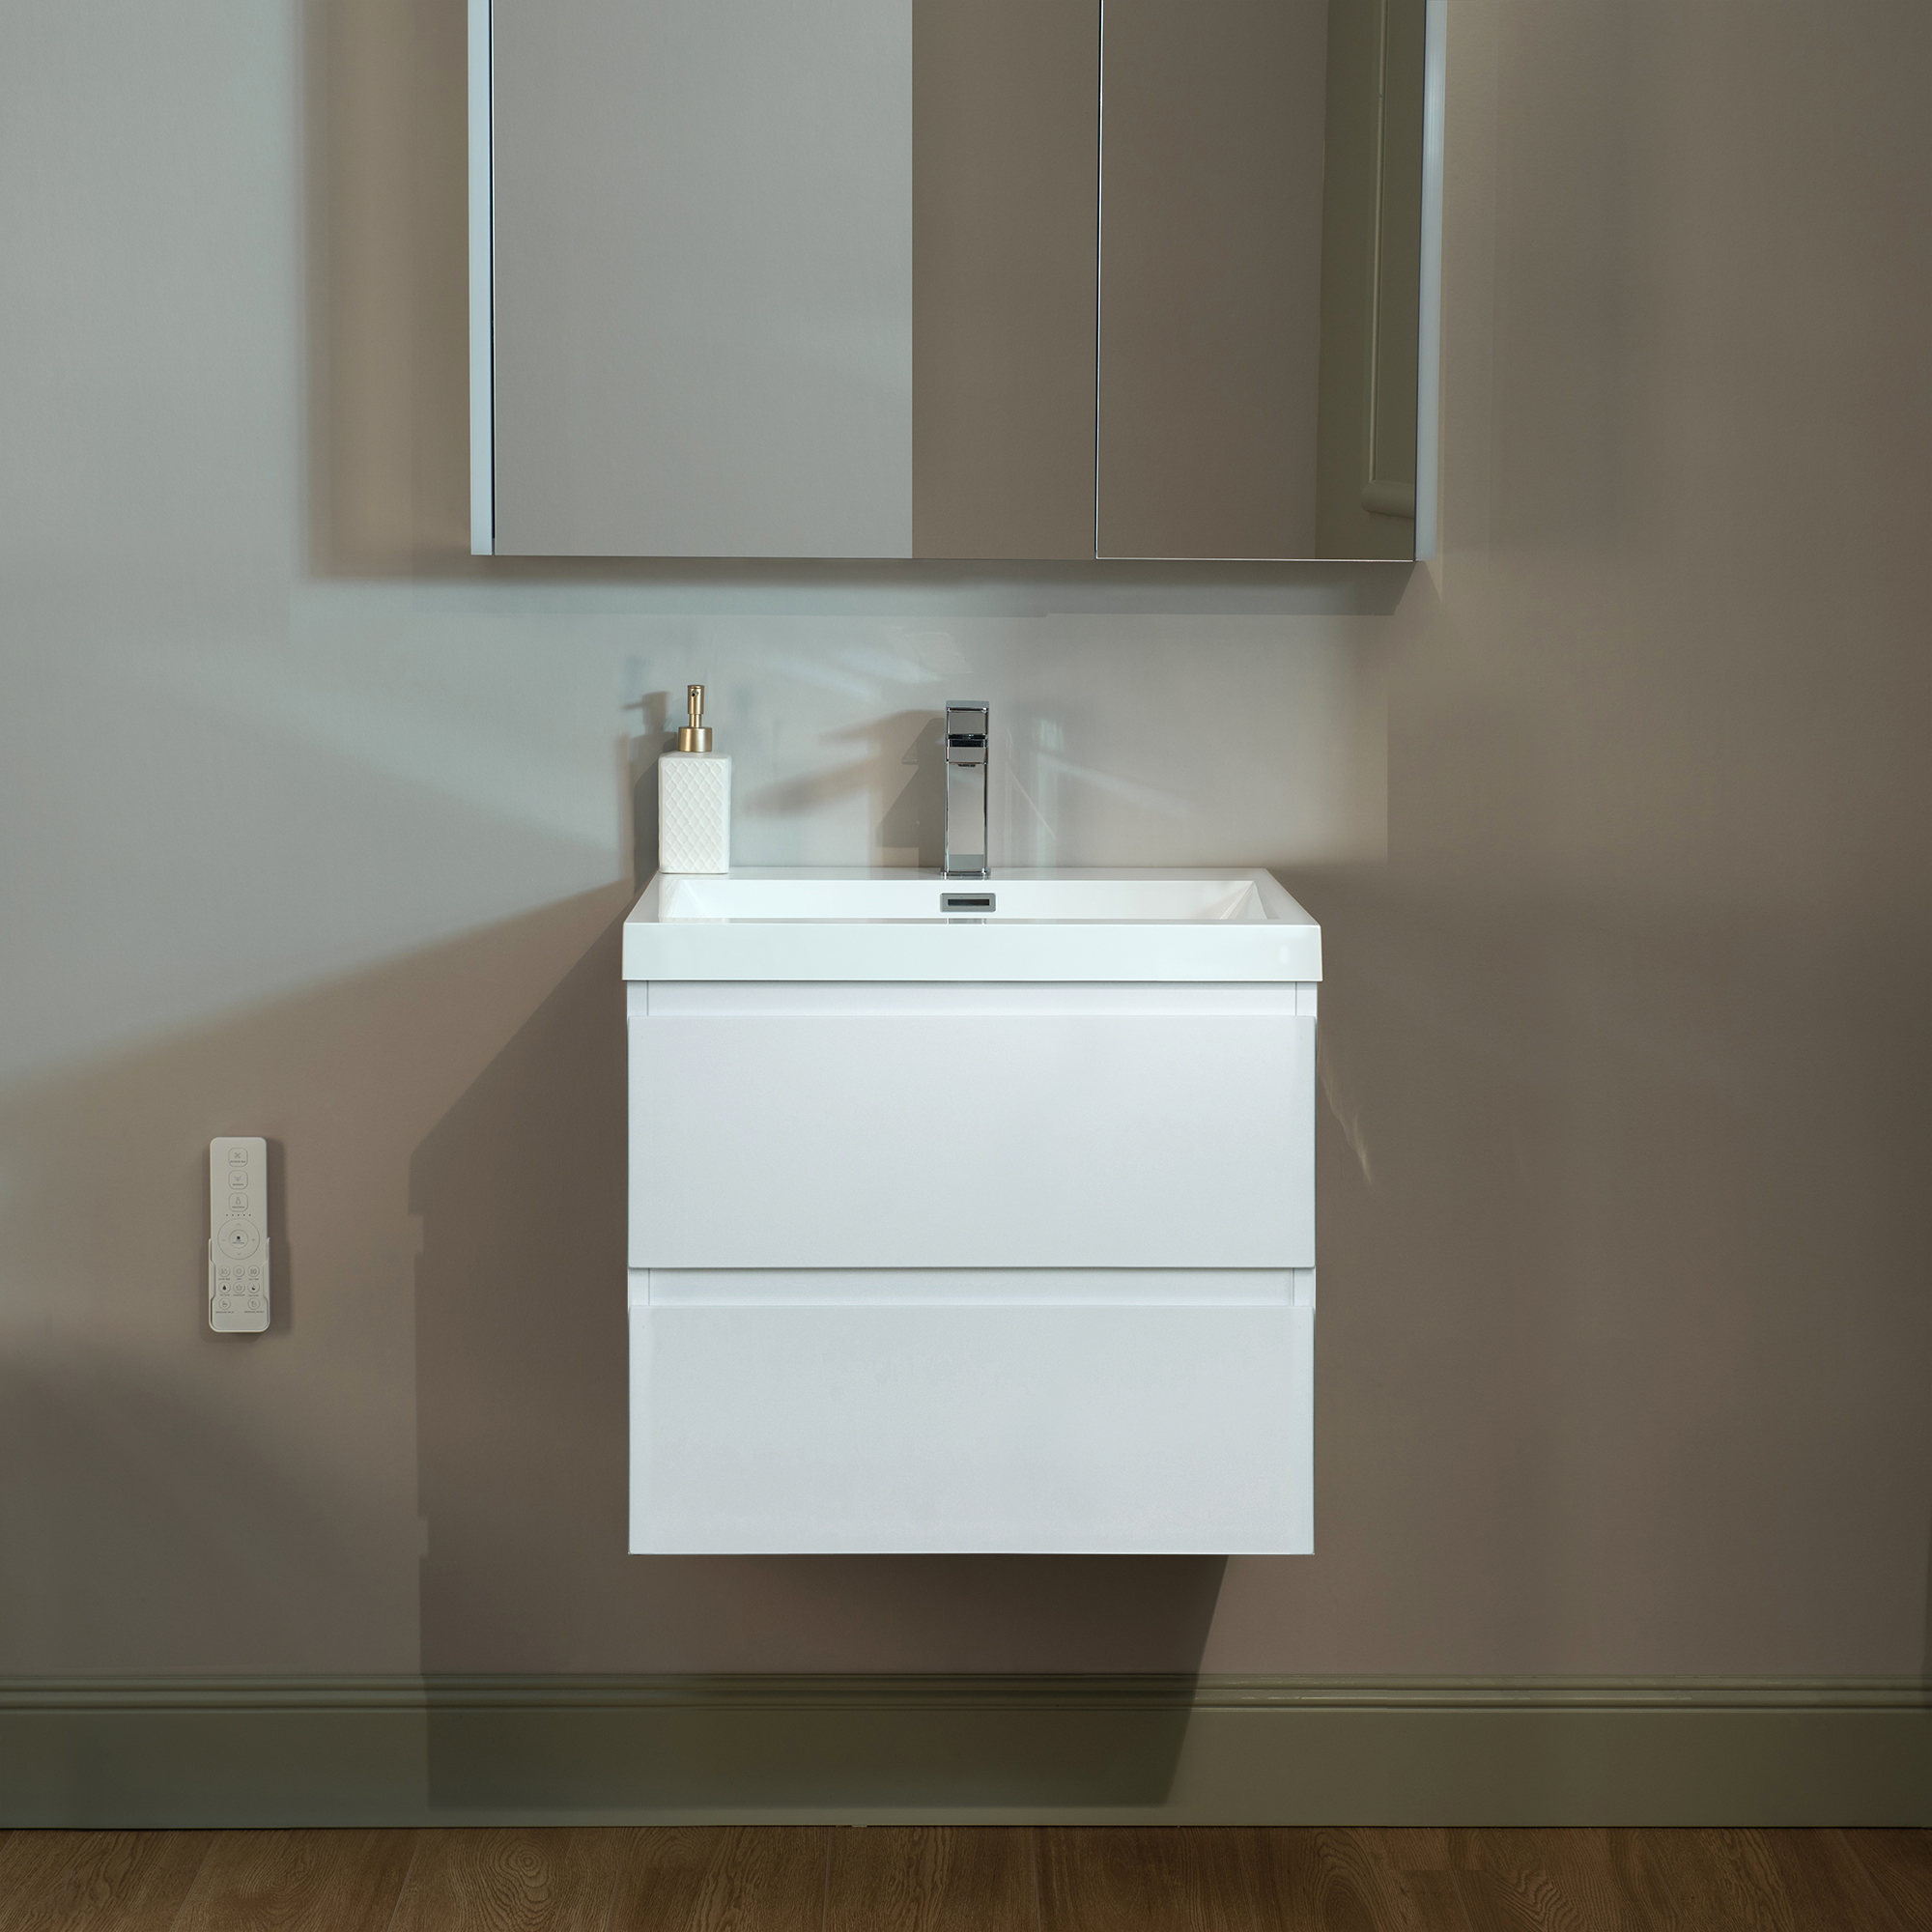 WOODBRIDGE 29-1/2 in. W x 19-5/8 in. D Wall Mounted Floating Vanity in Glossy White with Resin Composite Vanity Top in Glossy White